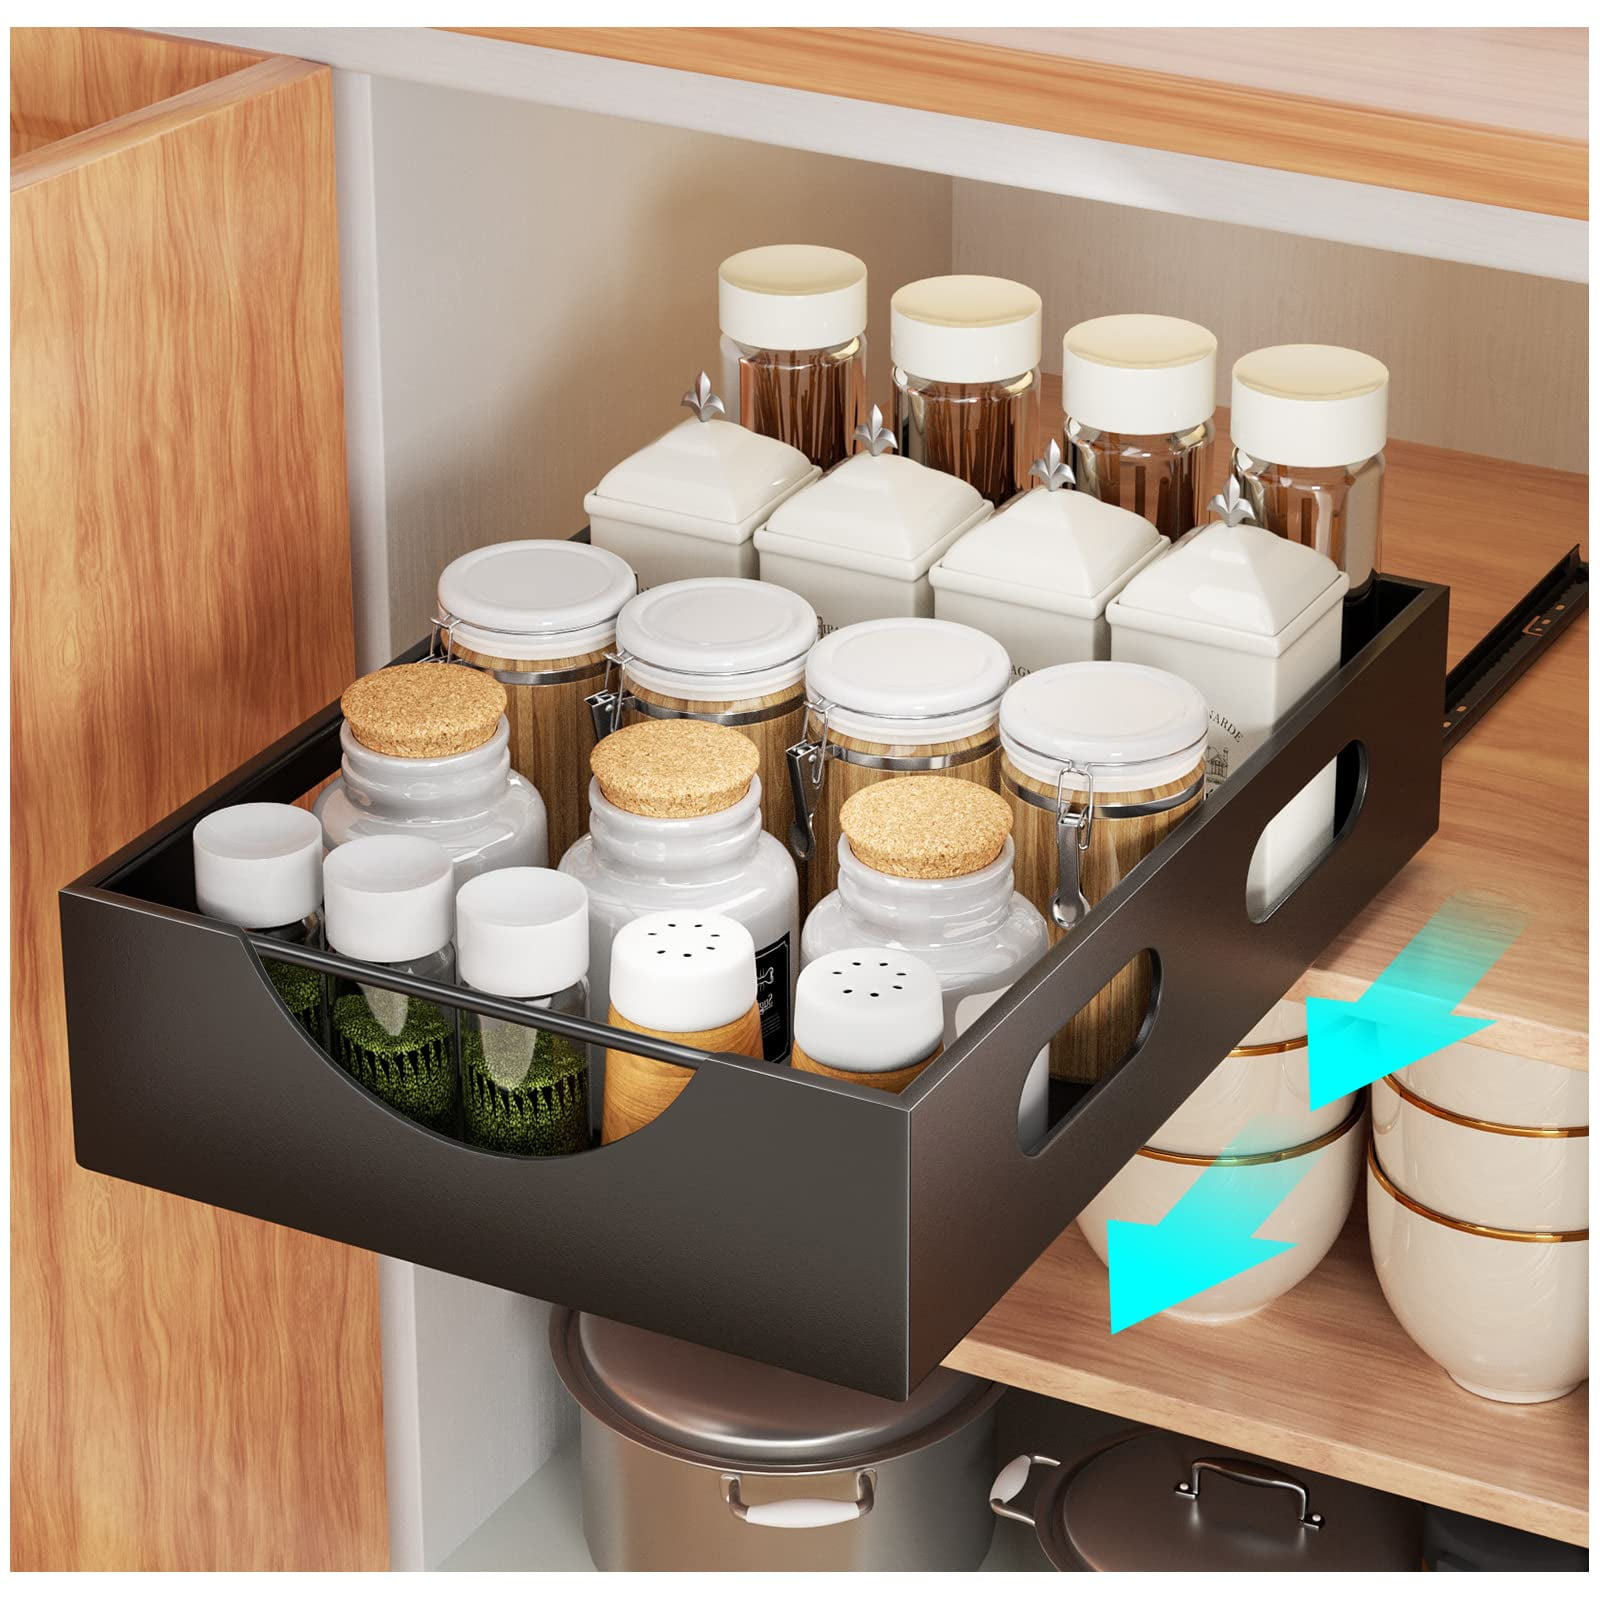 Pull Out Cabinet Organizer Fixed With Adhesive Nano Film,Heavy Duty ...